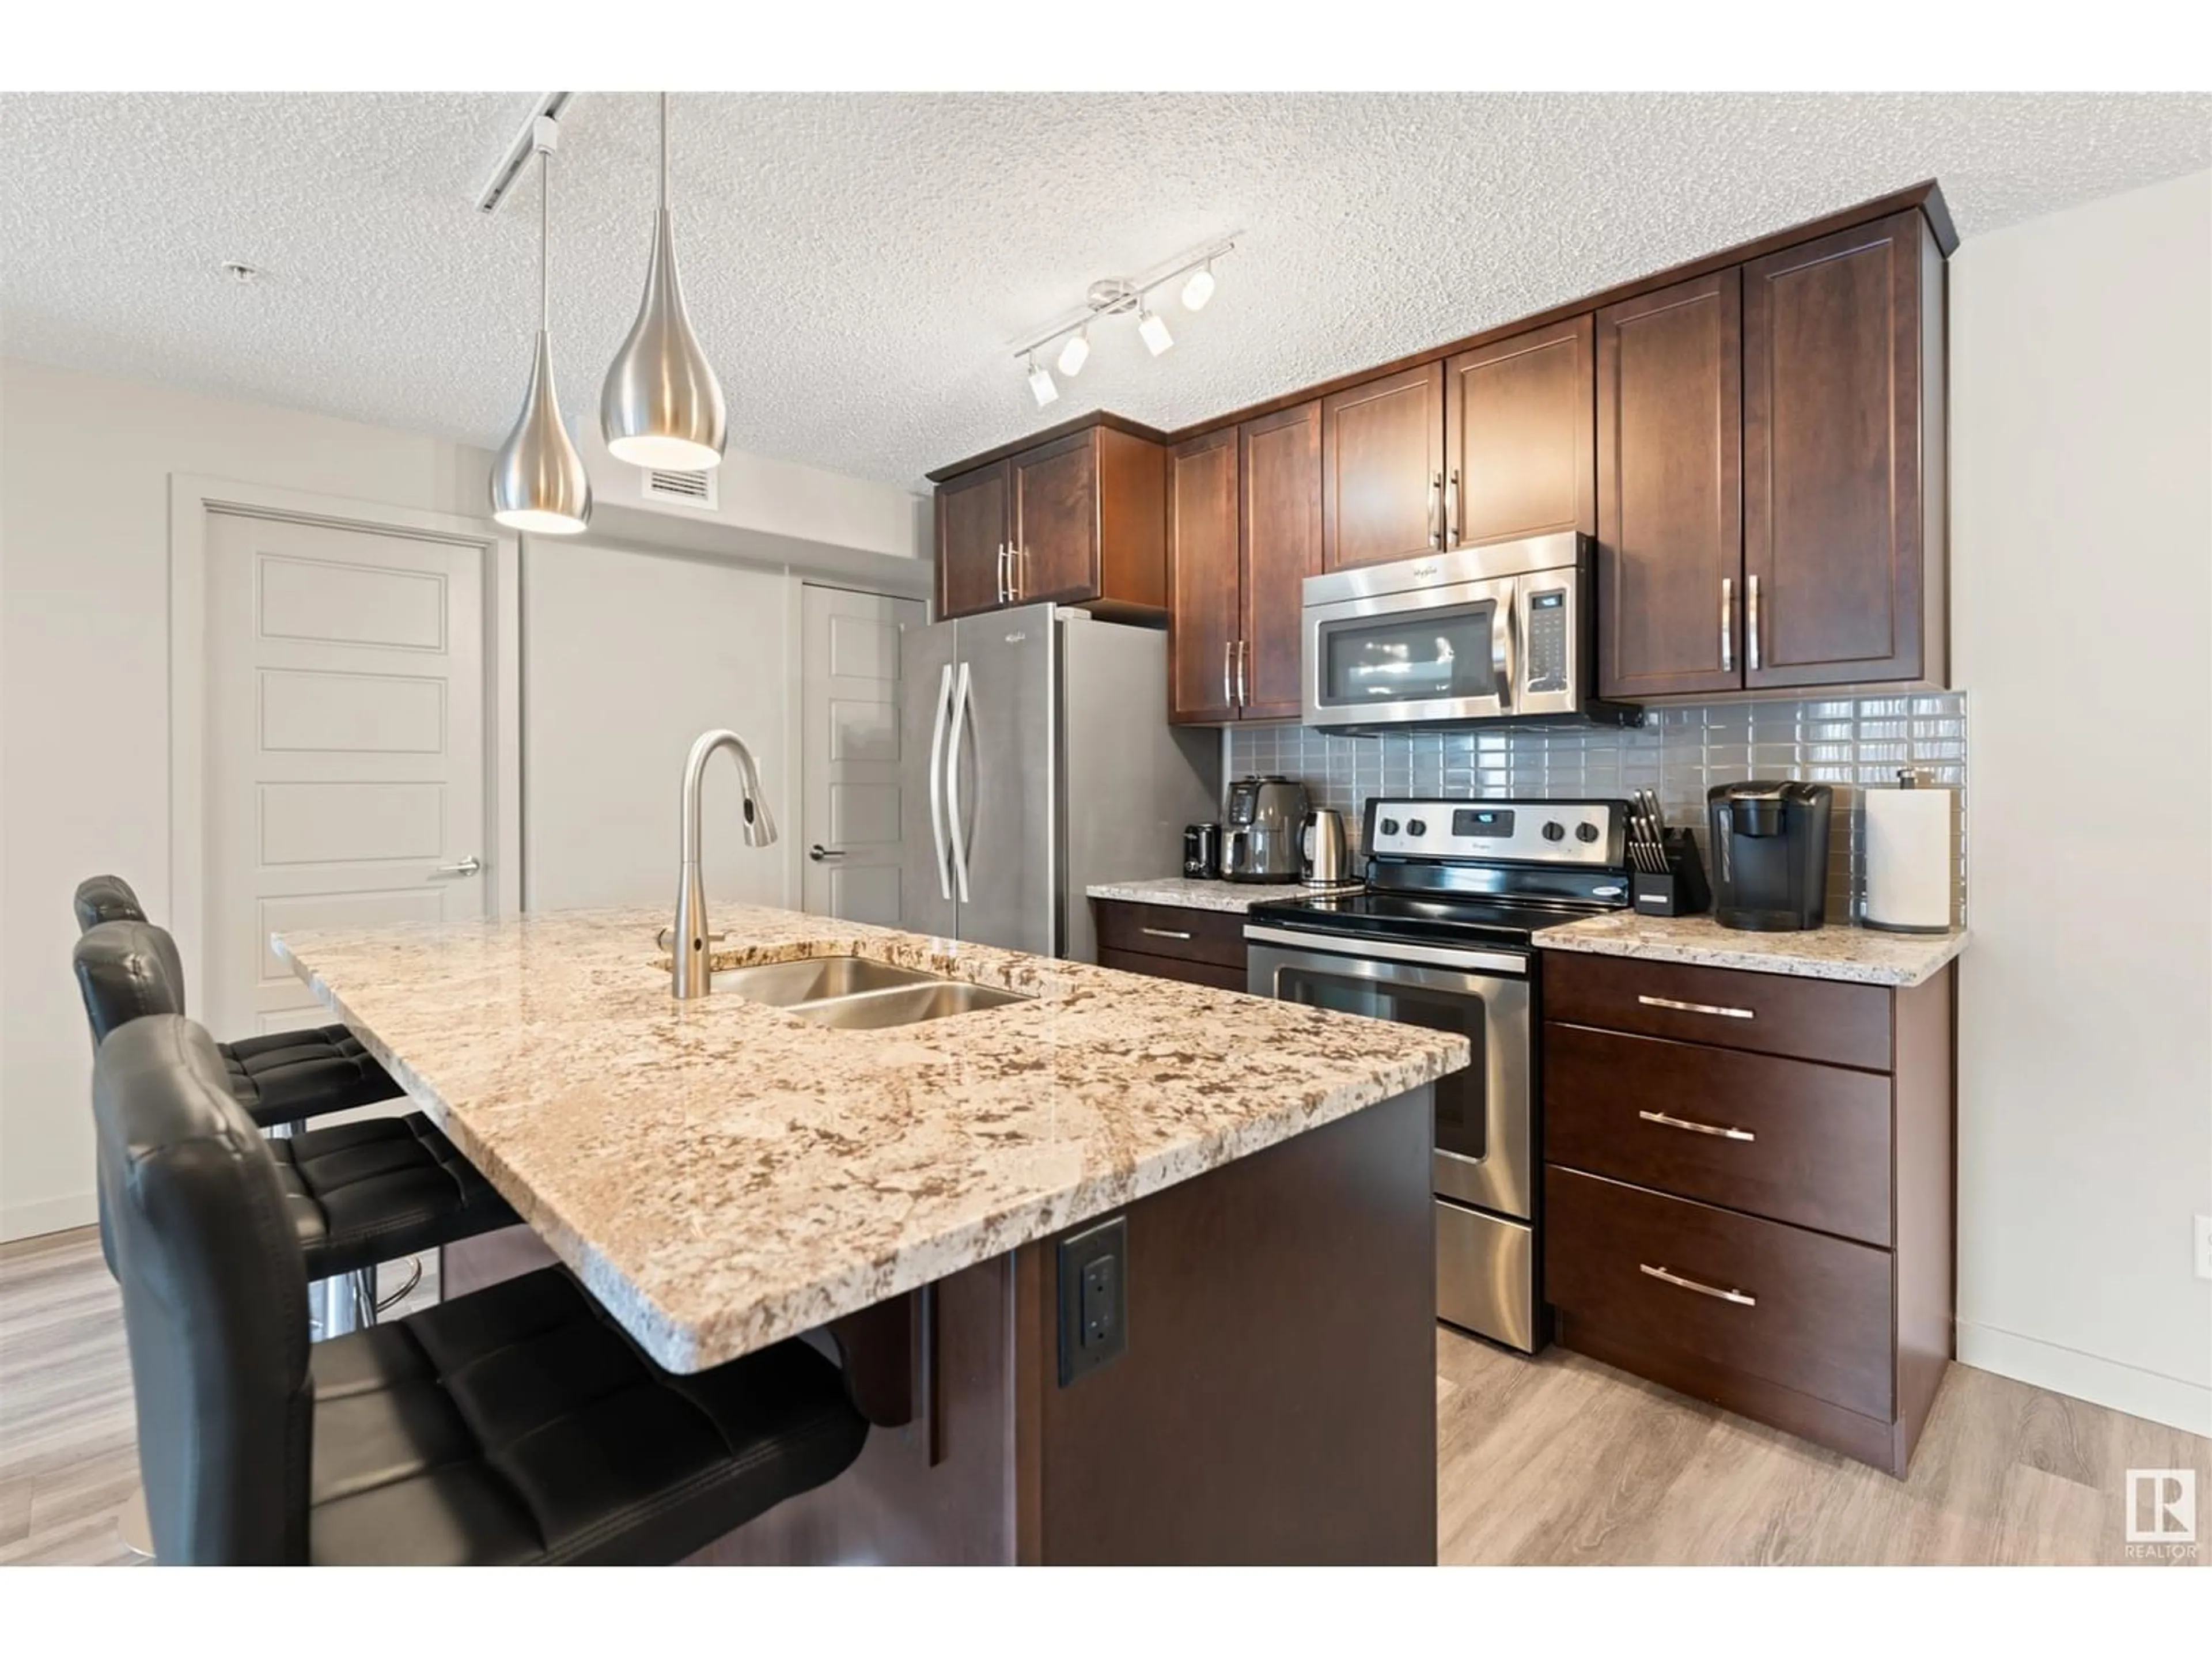 Standard kitchen for #216 5510 SCHONSEE DR NW NW, Edmonton Alberta T5Z0N9